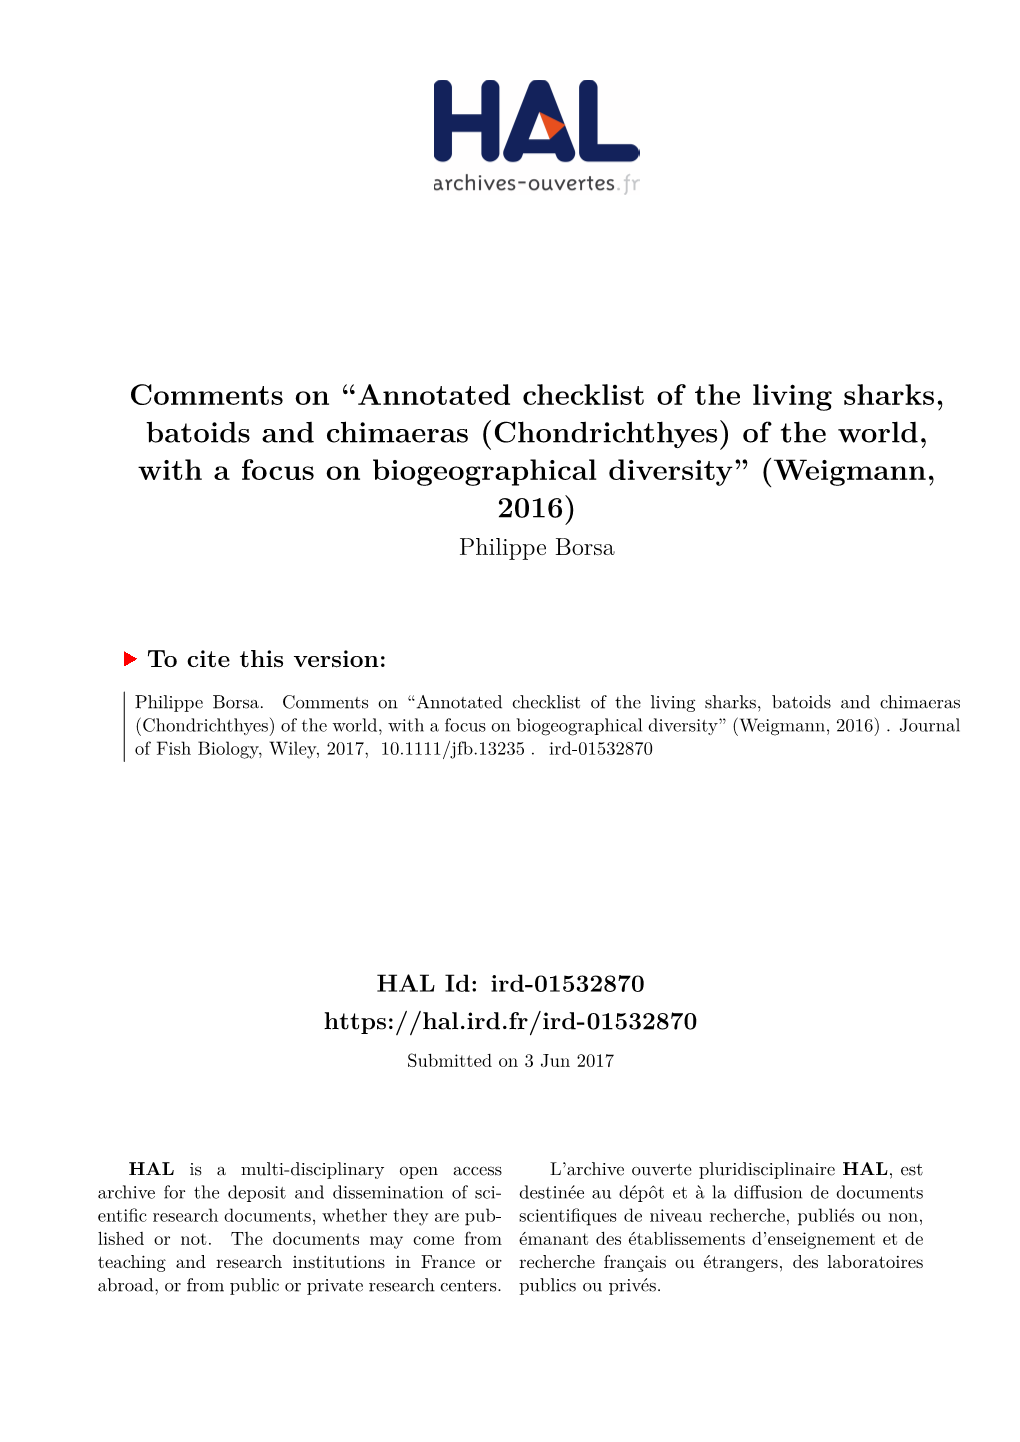 Comments on ``Annotated Checklist of the Living Sharks, Batoids and Chimaeras (Chondrichthyes) of the World, with a Focus On